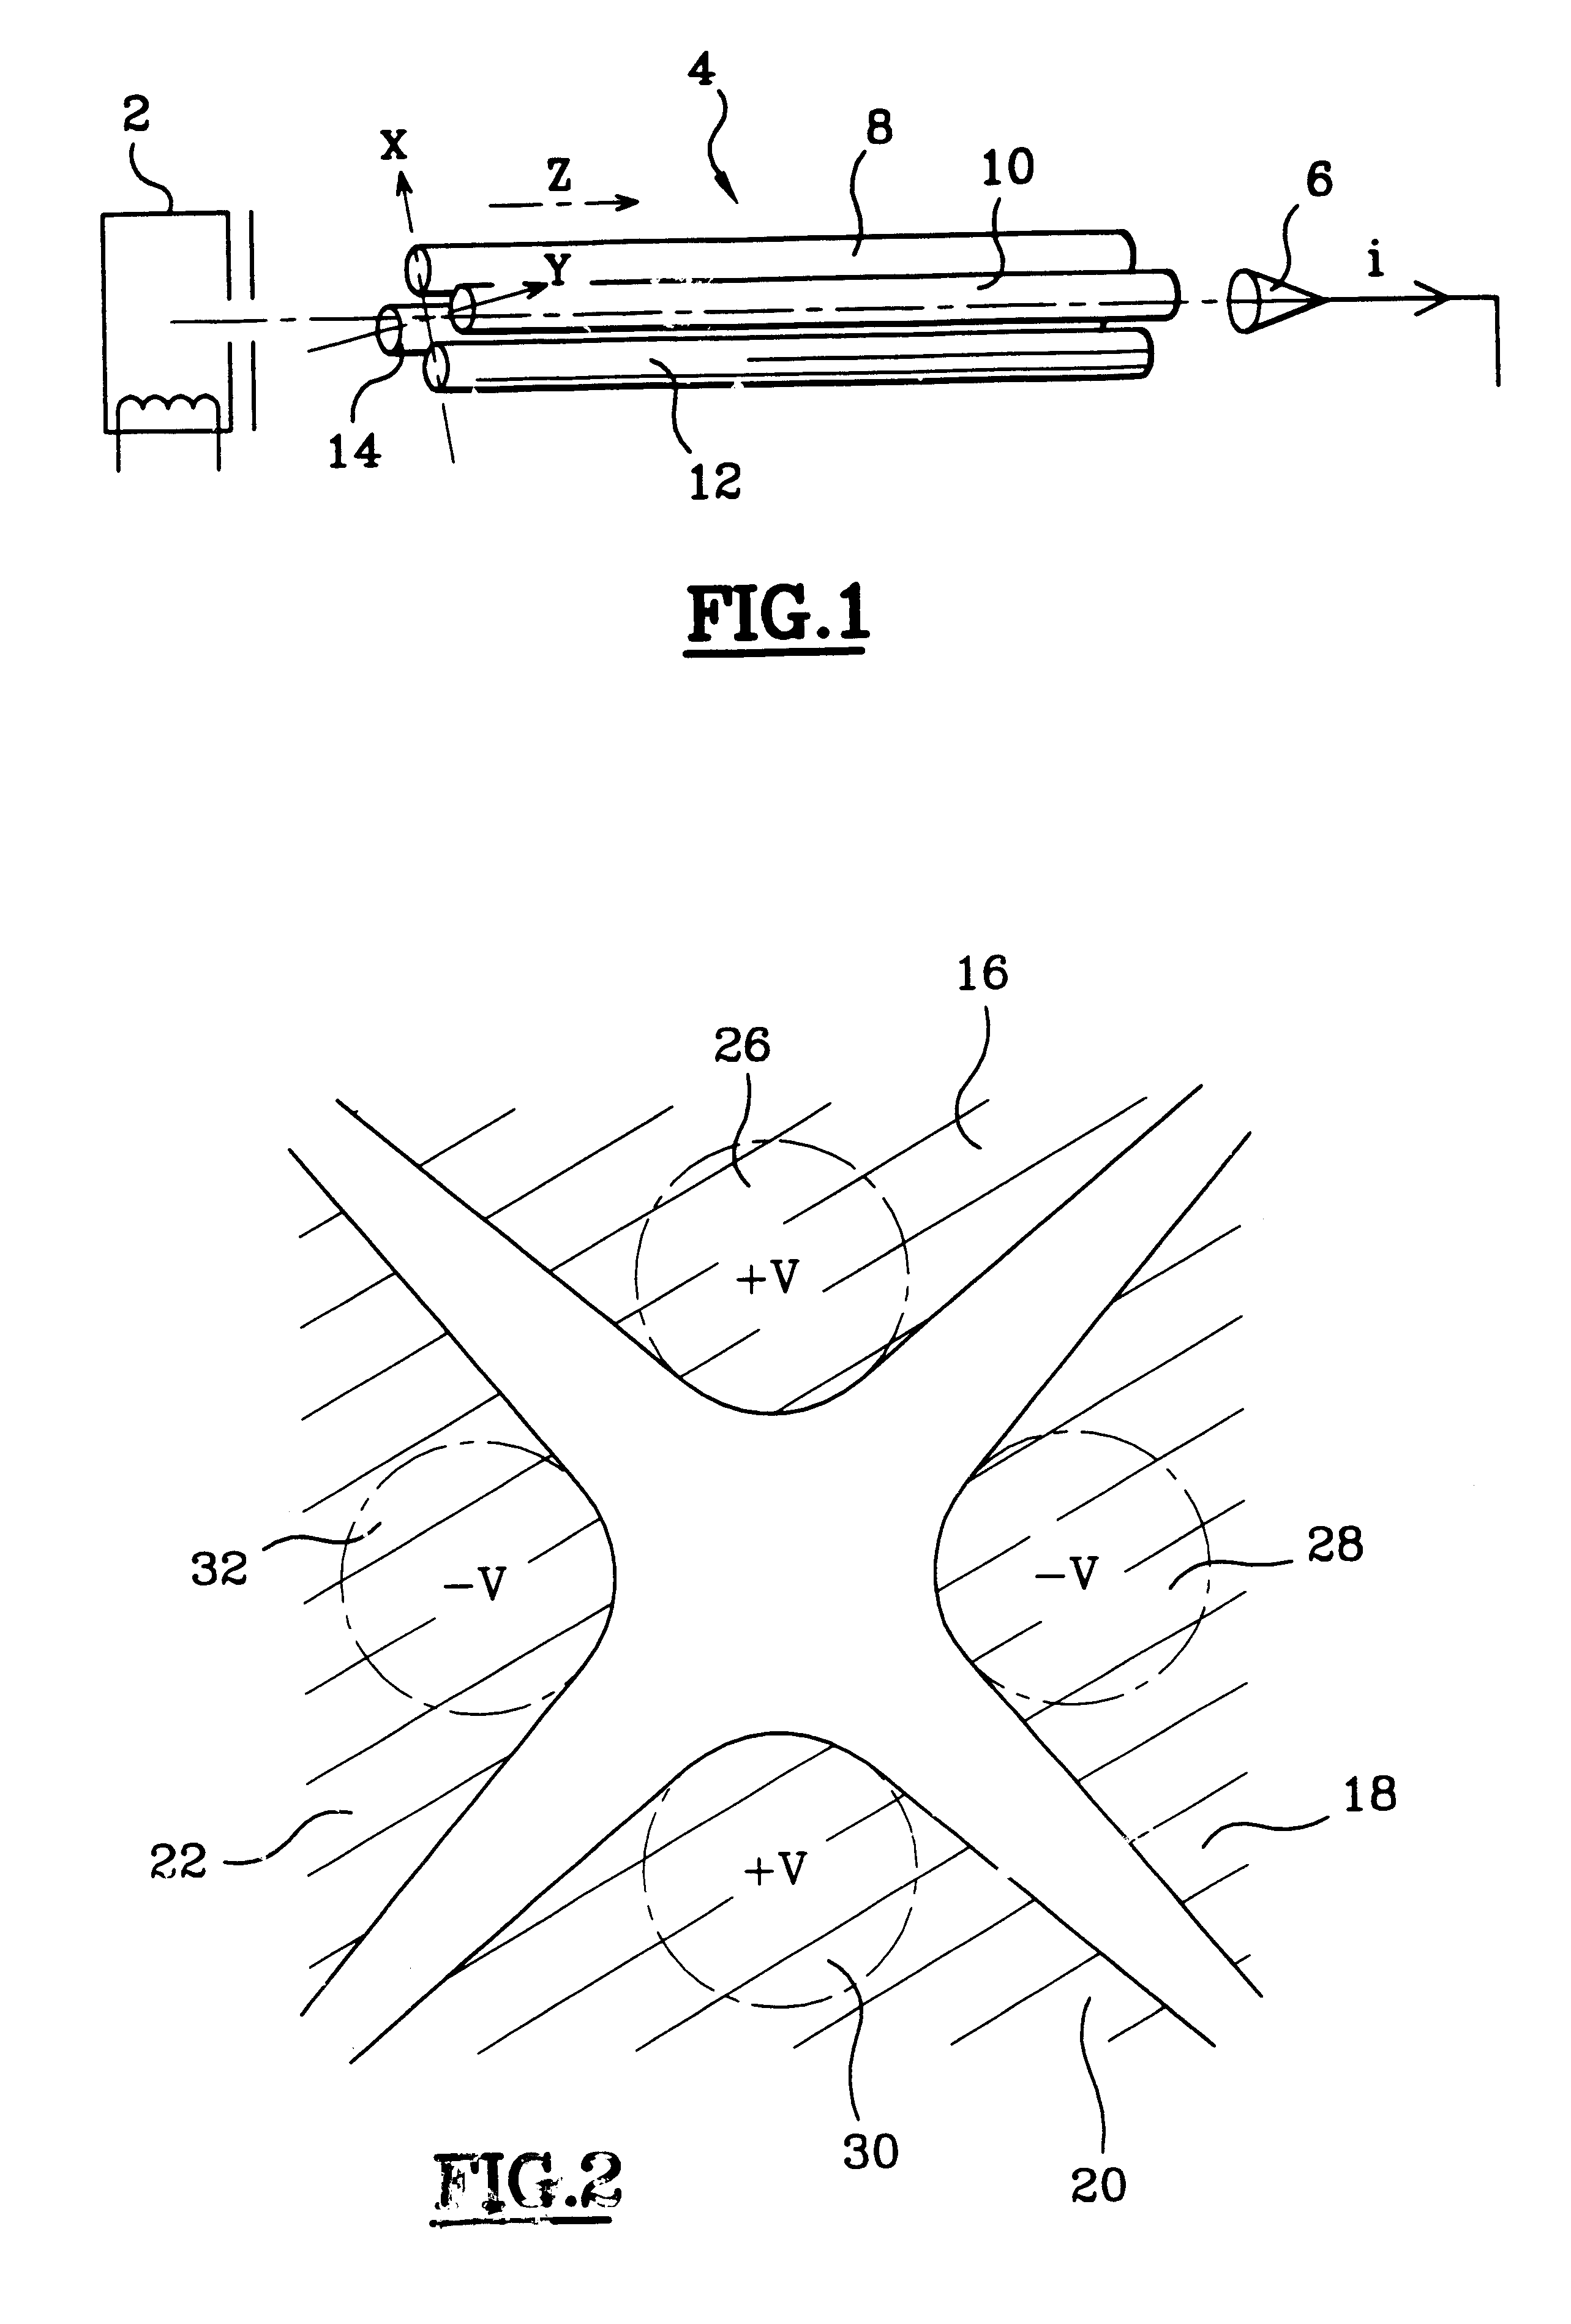 Miniature device for generating a multi-polar field, in particular for filtering or deviating or focusing charged particles